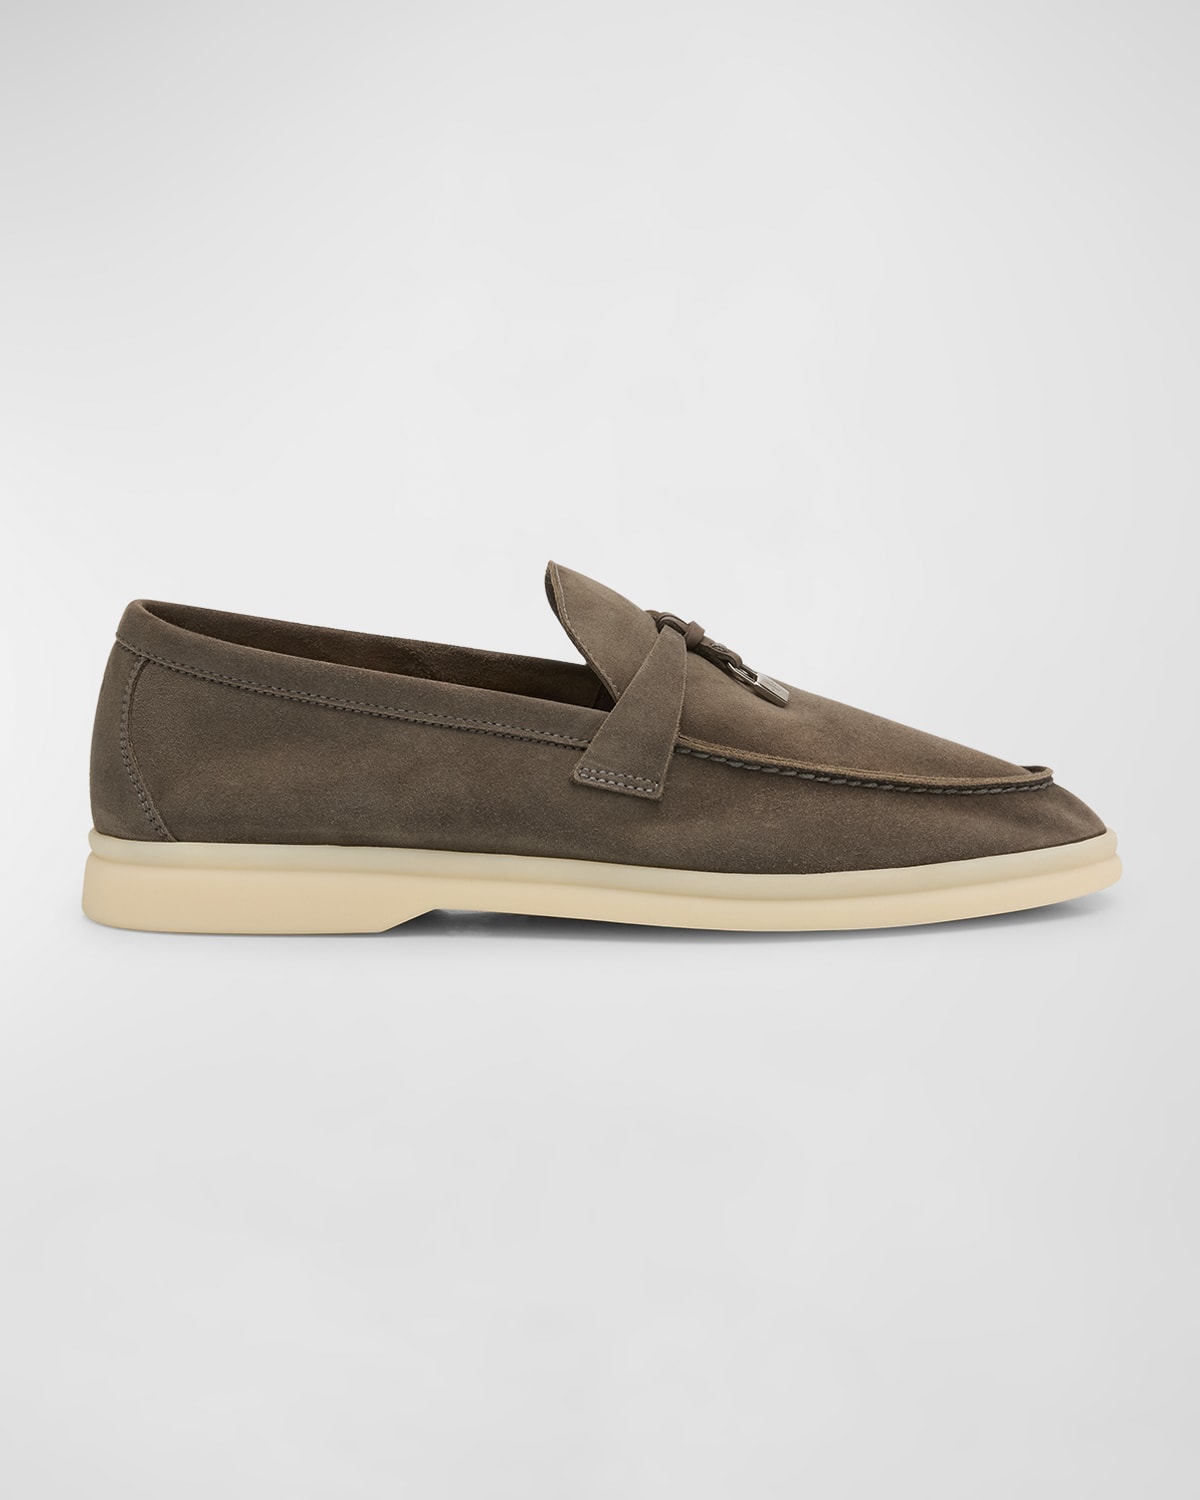 Loro Piana Summer Charms Walk Suede Loafers In Shade Grown